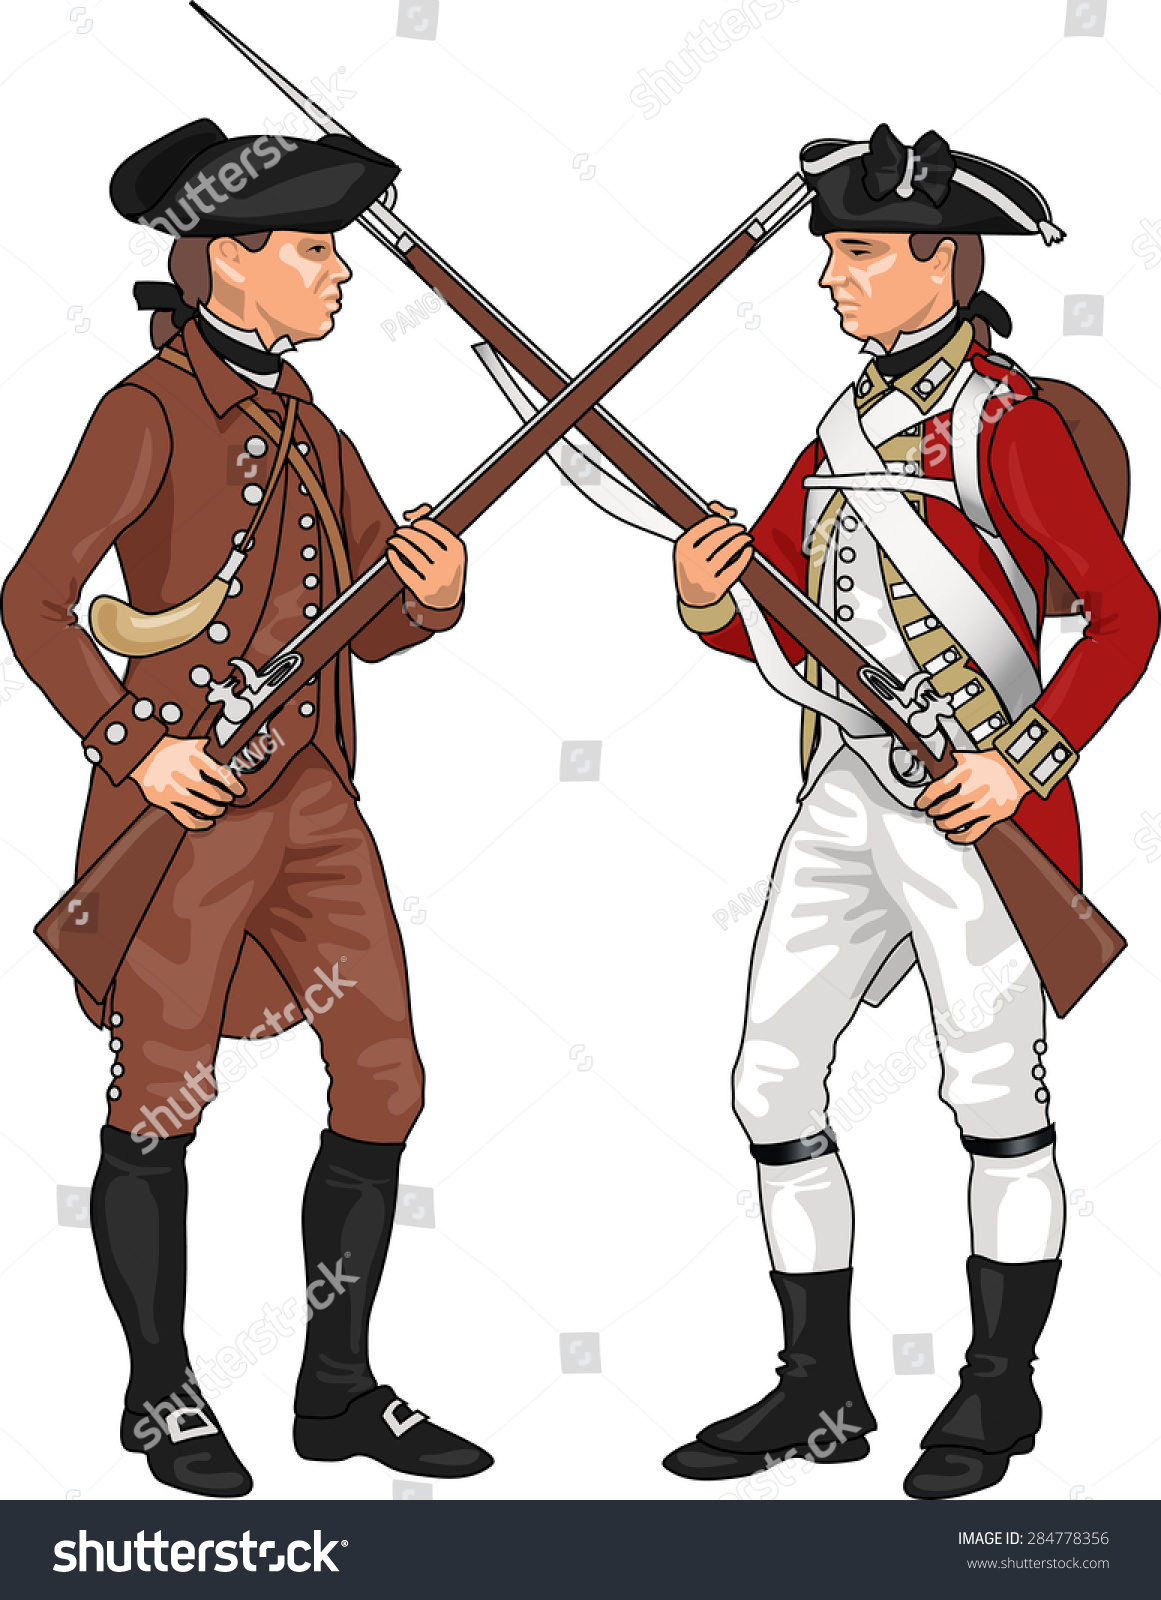 clipart french and indian war - photo #22